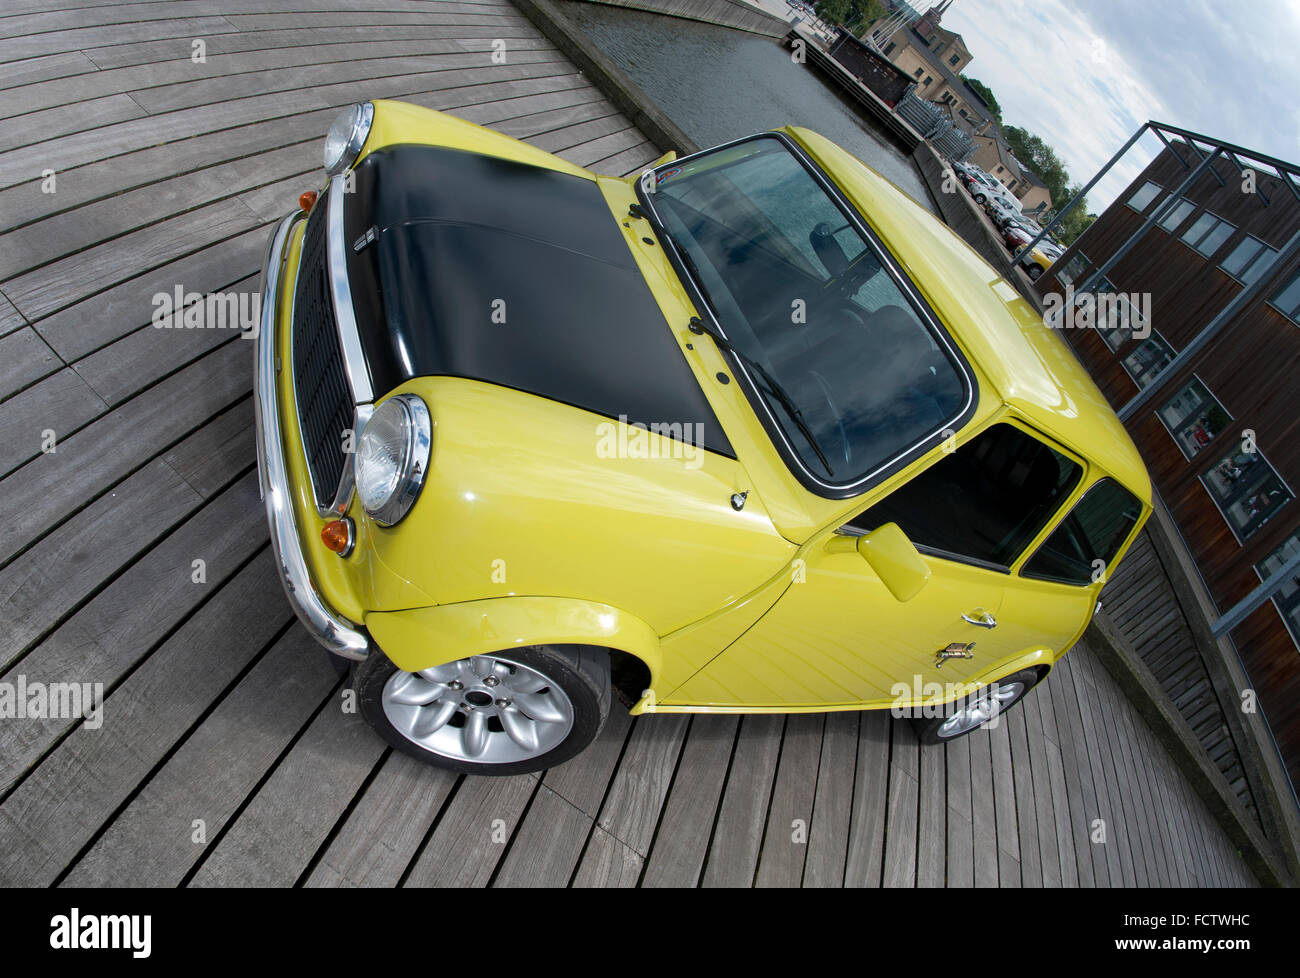 Mr Bean style Mini car complete with bolts on the doors Stock Photo